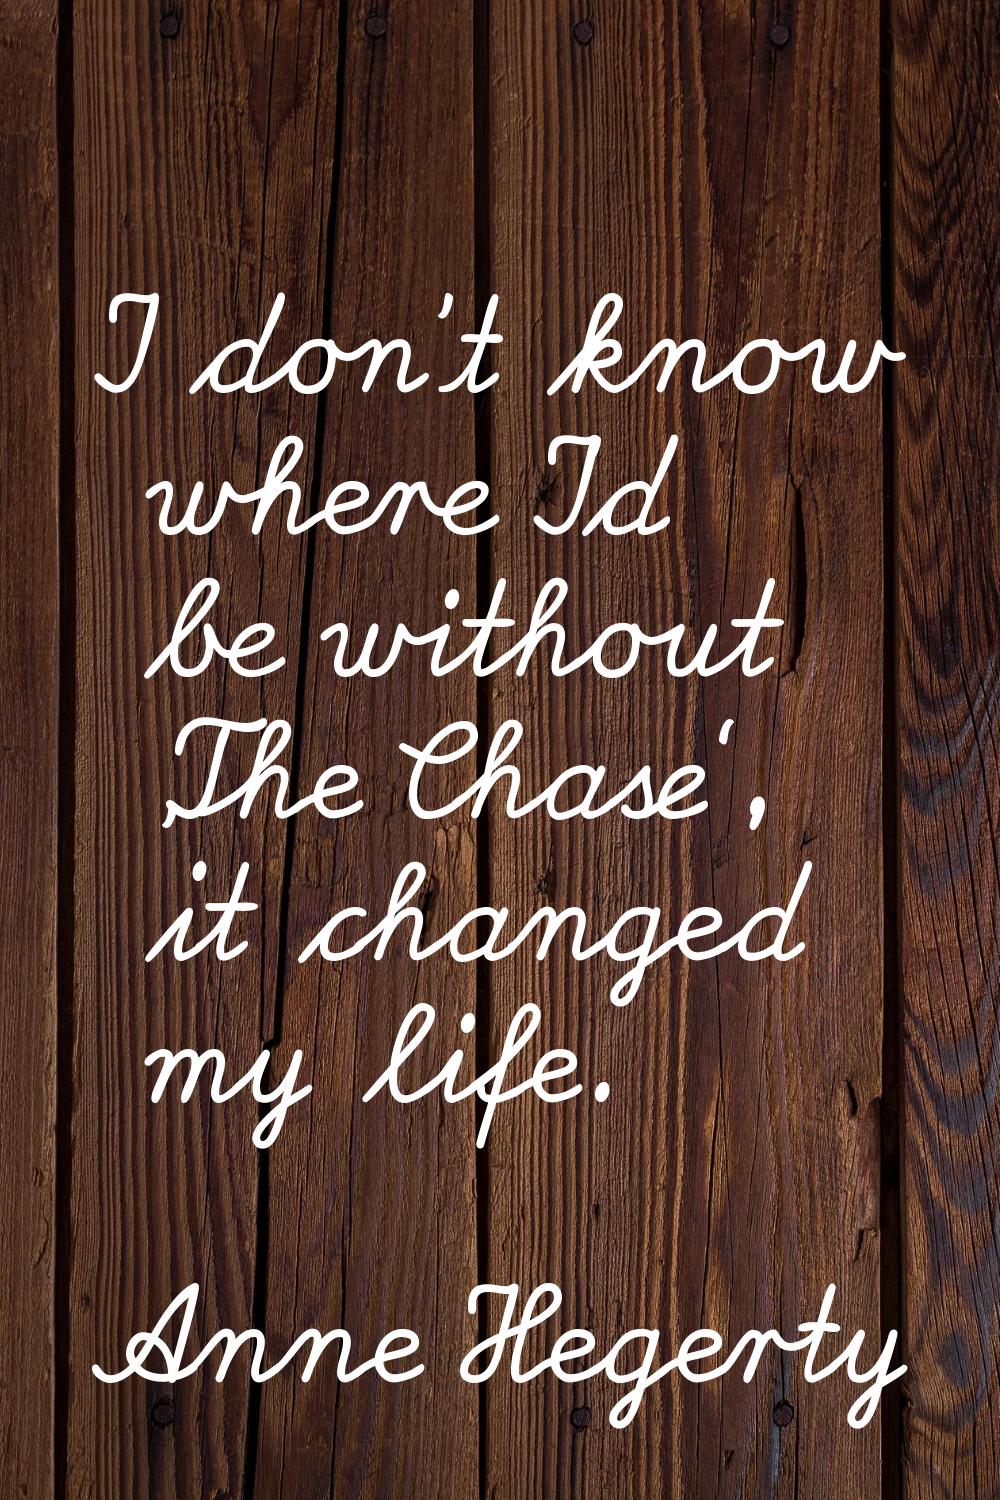 I don't know where I'd be without 'The Chase', it changed my life.